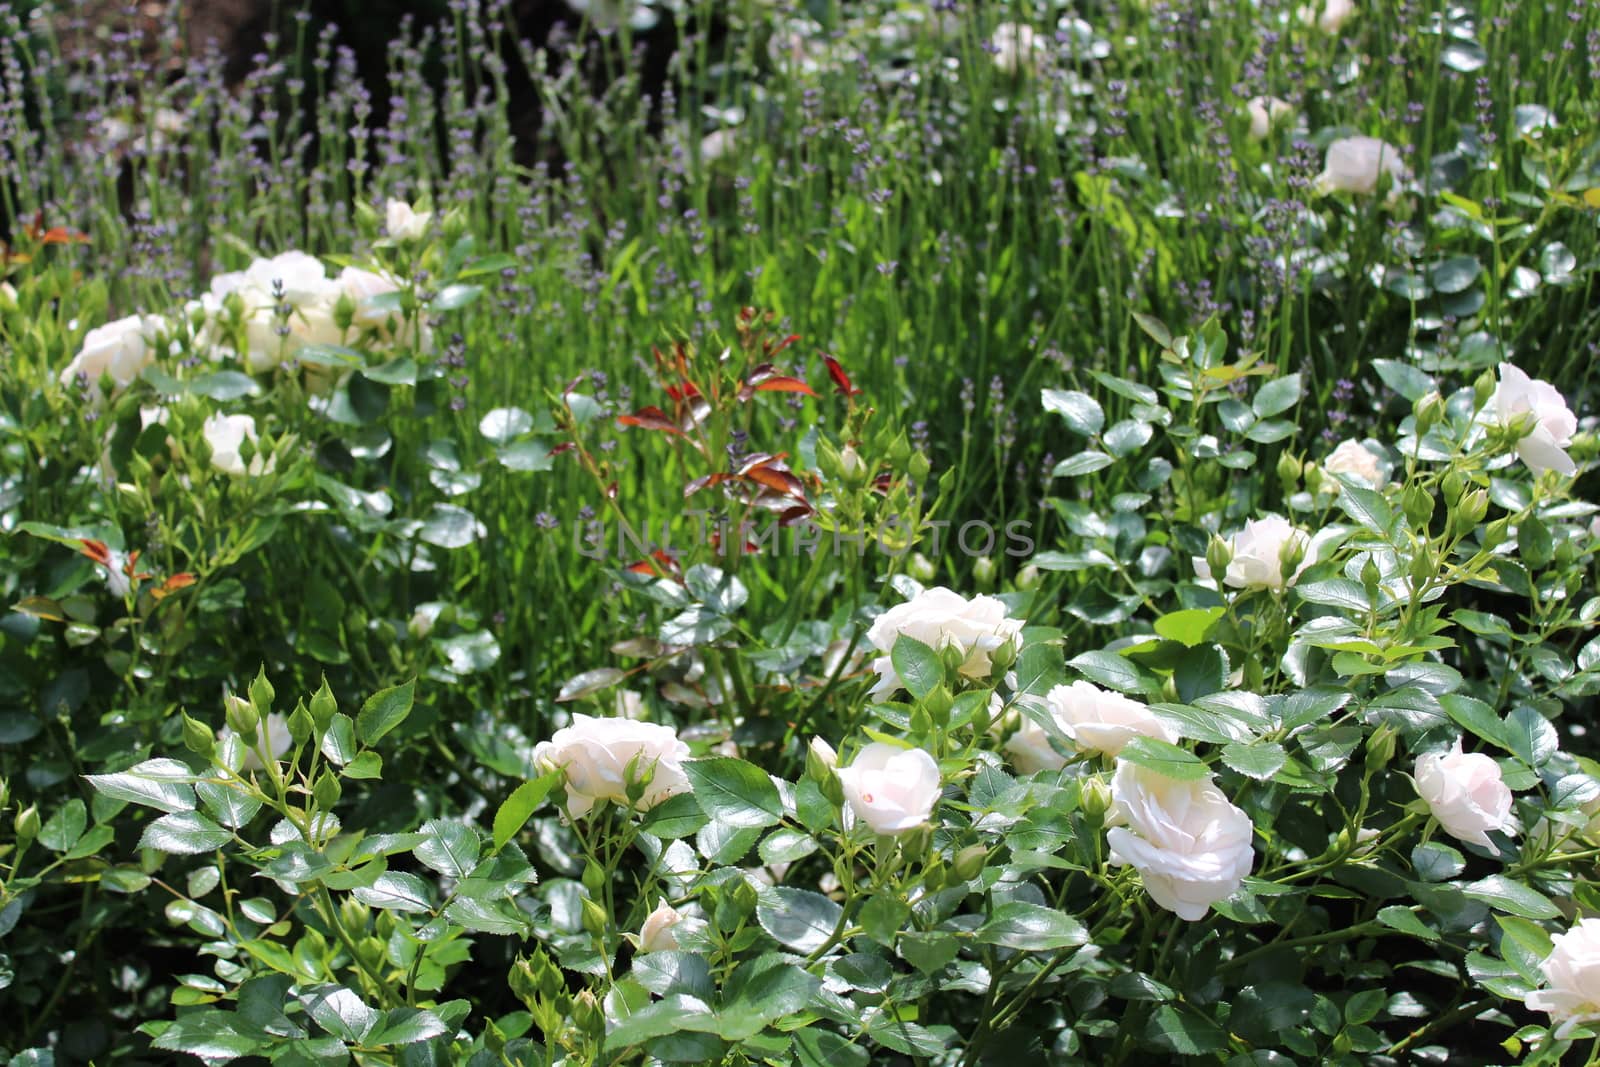 The picture shows white roses in the garden